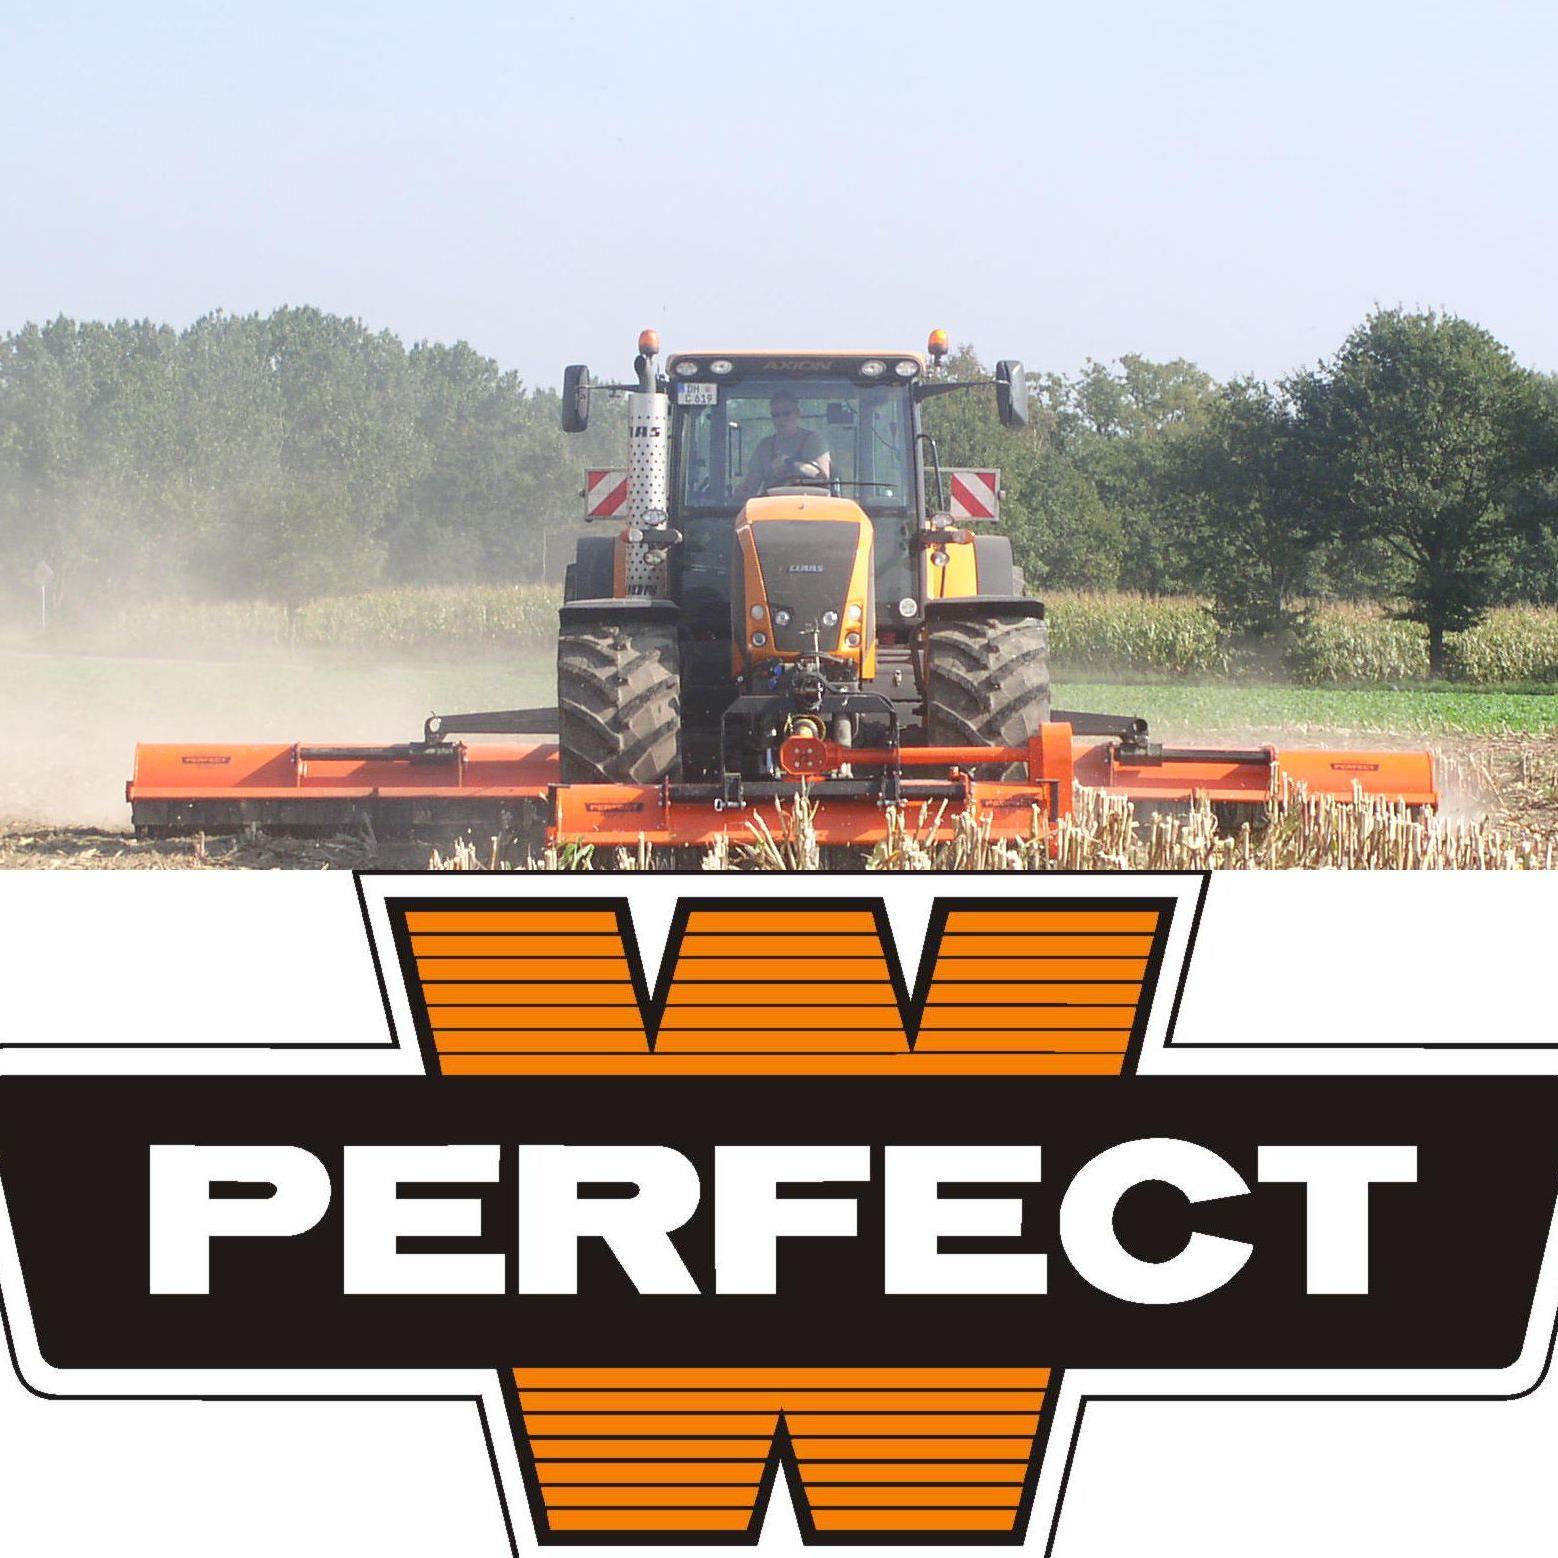 #PERFECT quality flail mowers/shredders, orchard mowers and fruit/veg grading equipment, est. 1947